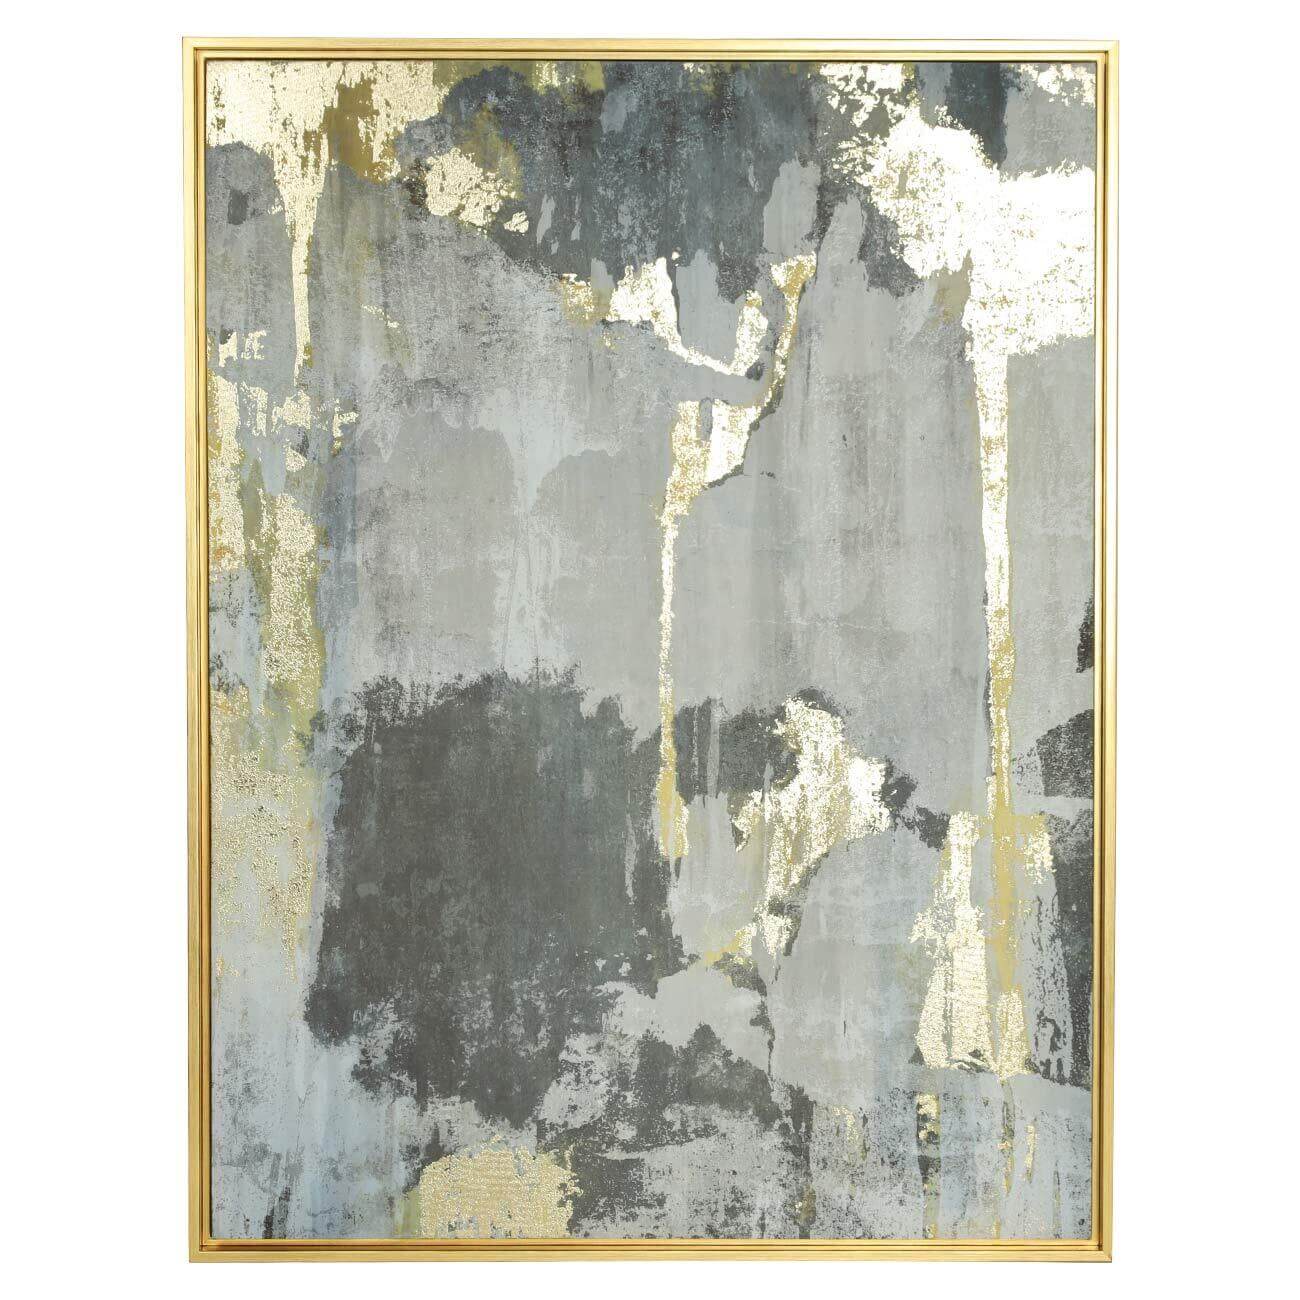 Framed painting, 75x100 cm, canvas / foil, golden gray, Abstract изображение № 1